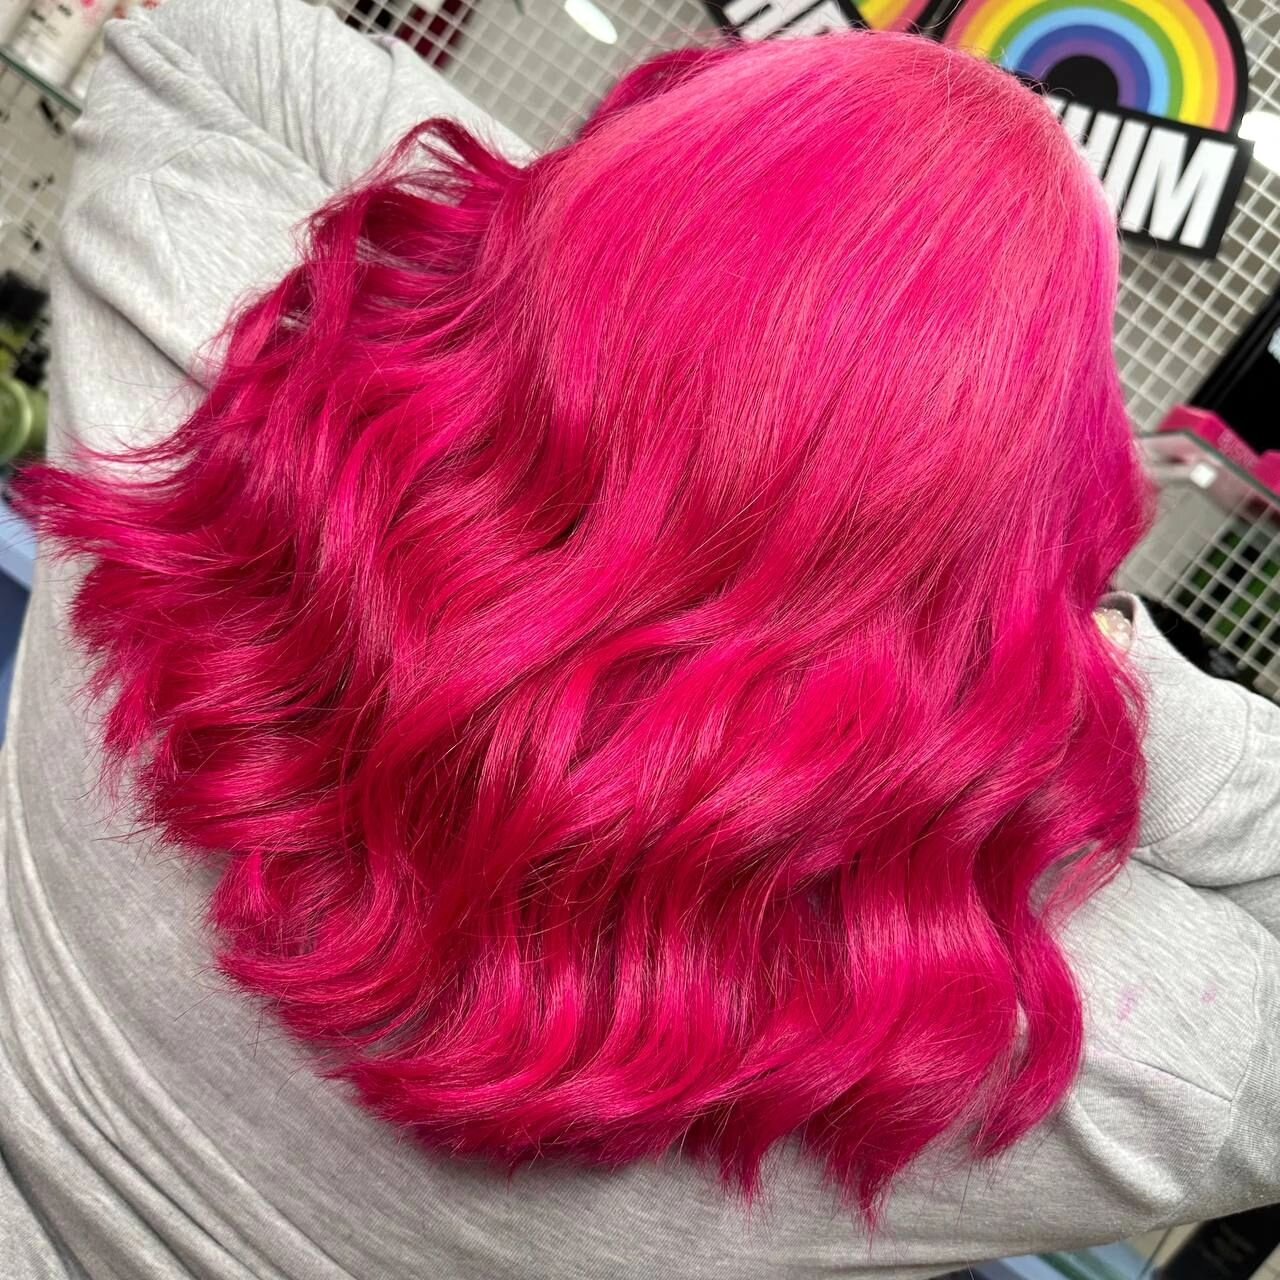 PRETTY IN PINK! 💖

Here at Not Another Salon, we can transform your hair in anyway you like! An opportunity to help embrace yourself 🫶🏻 @crazycolorpro ✨️

If you want stunning results like this, created by Mel, call us or email to get booked with 